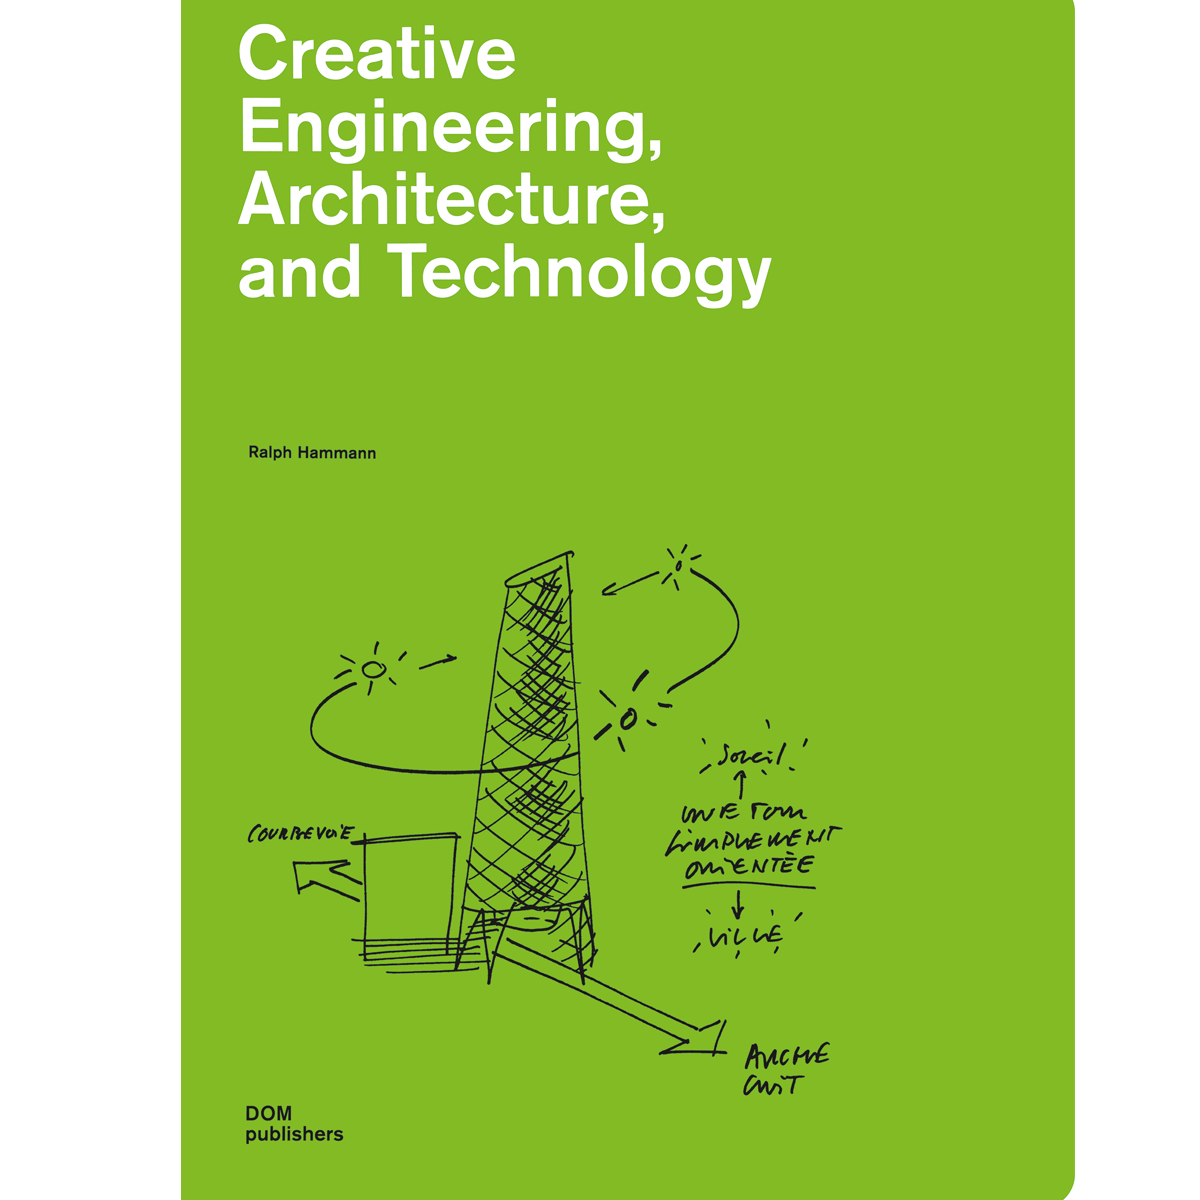 Creative Engineering, Architecture and Technology